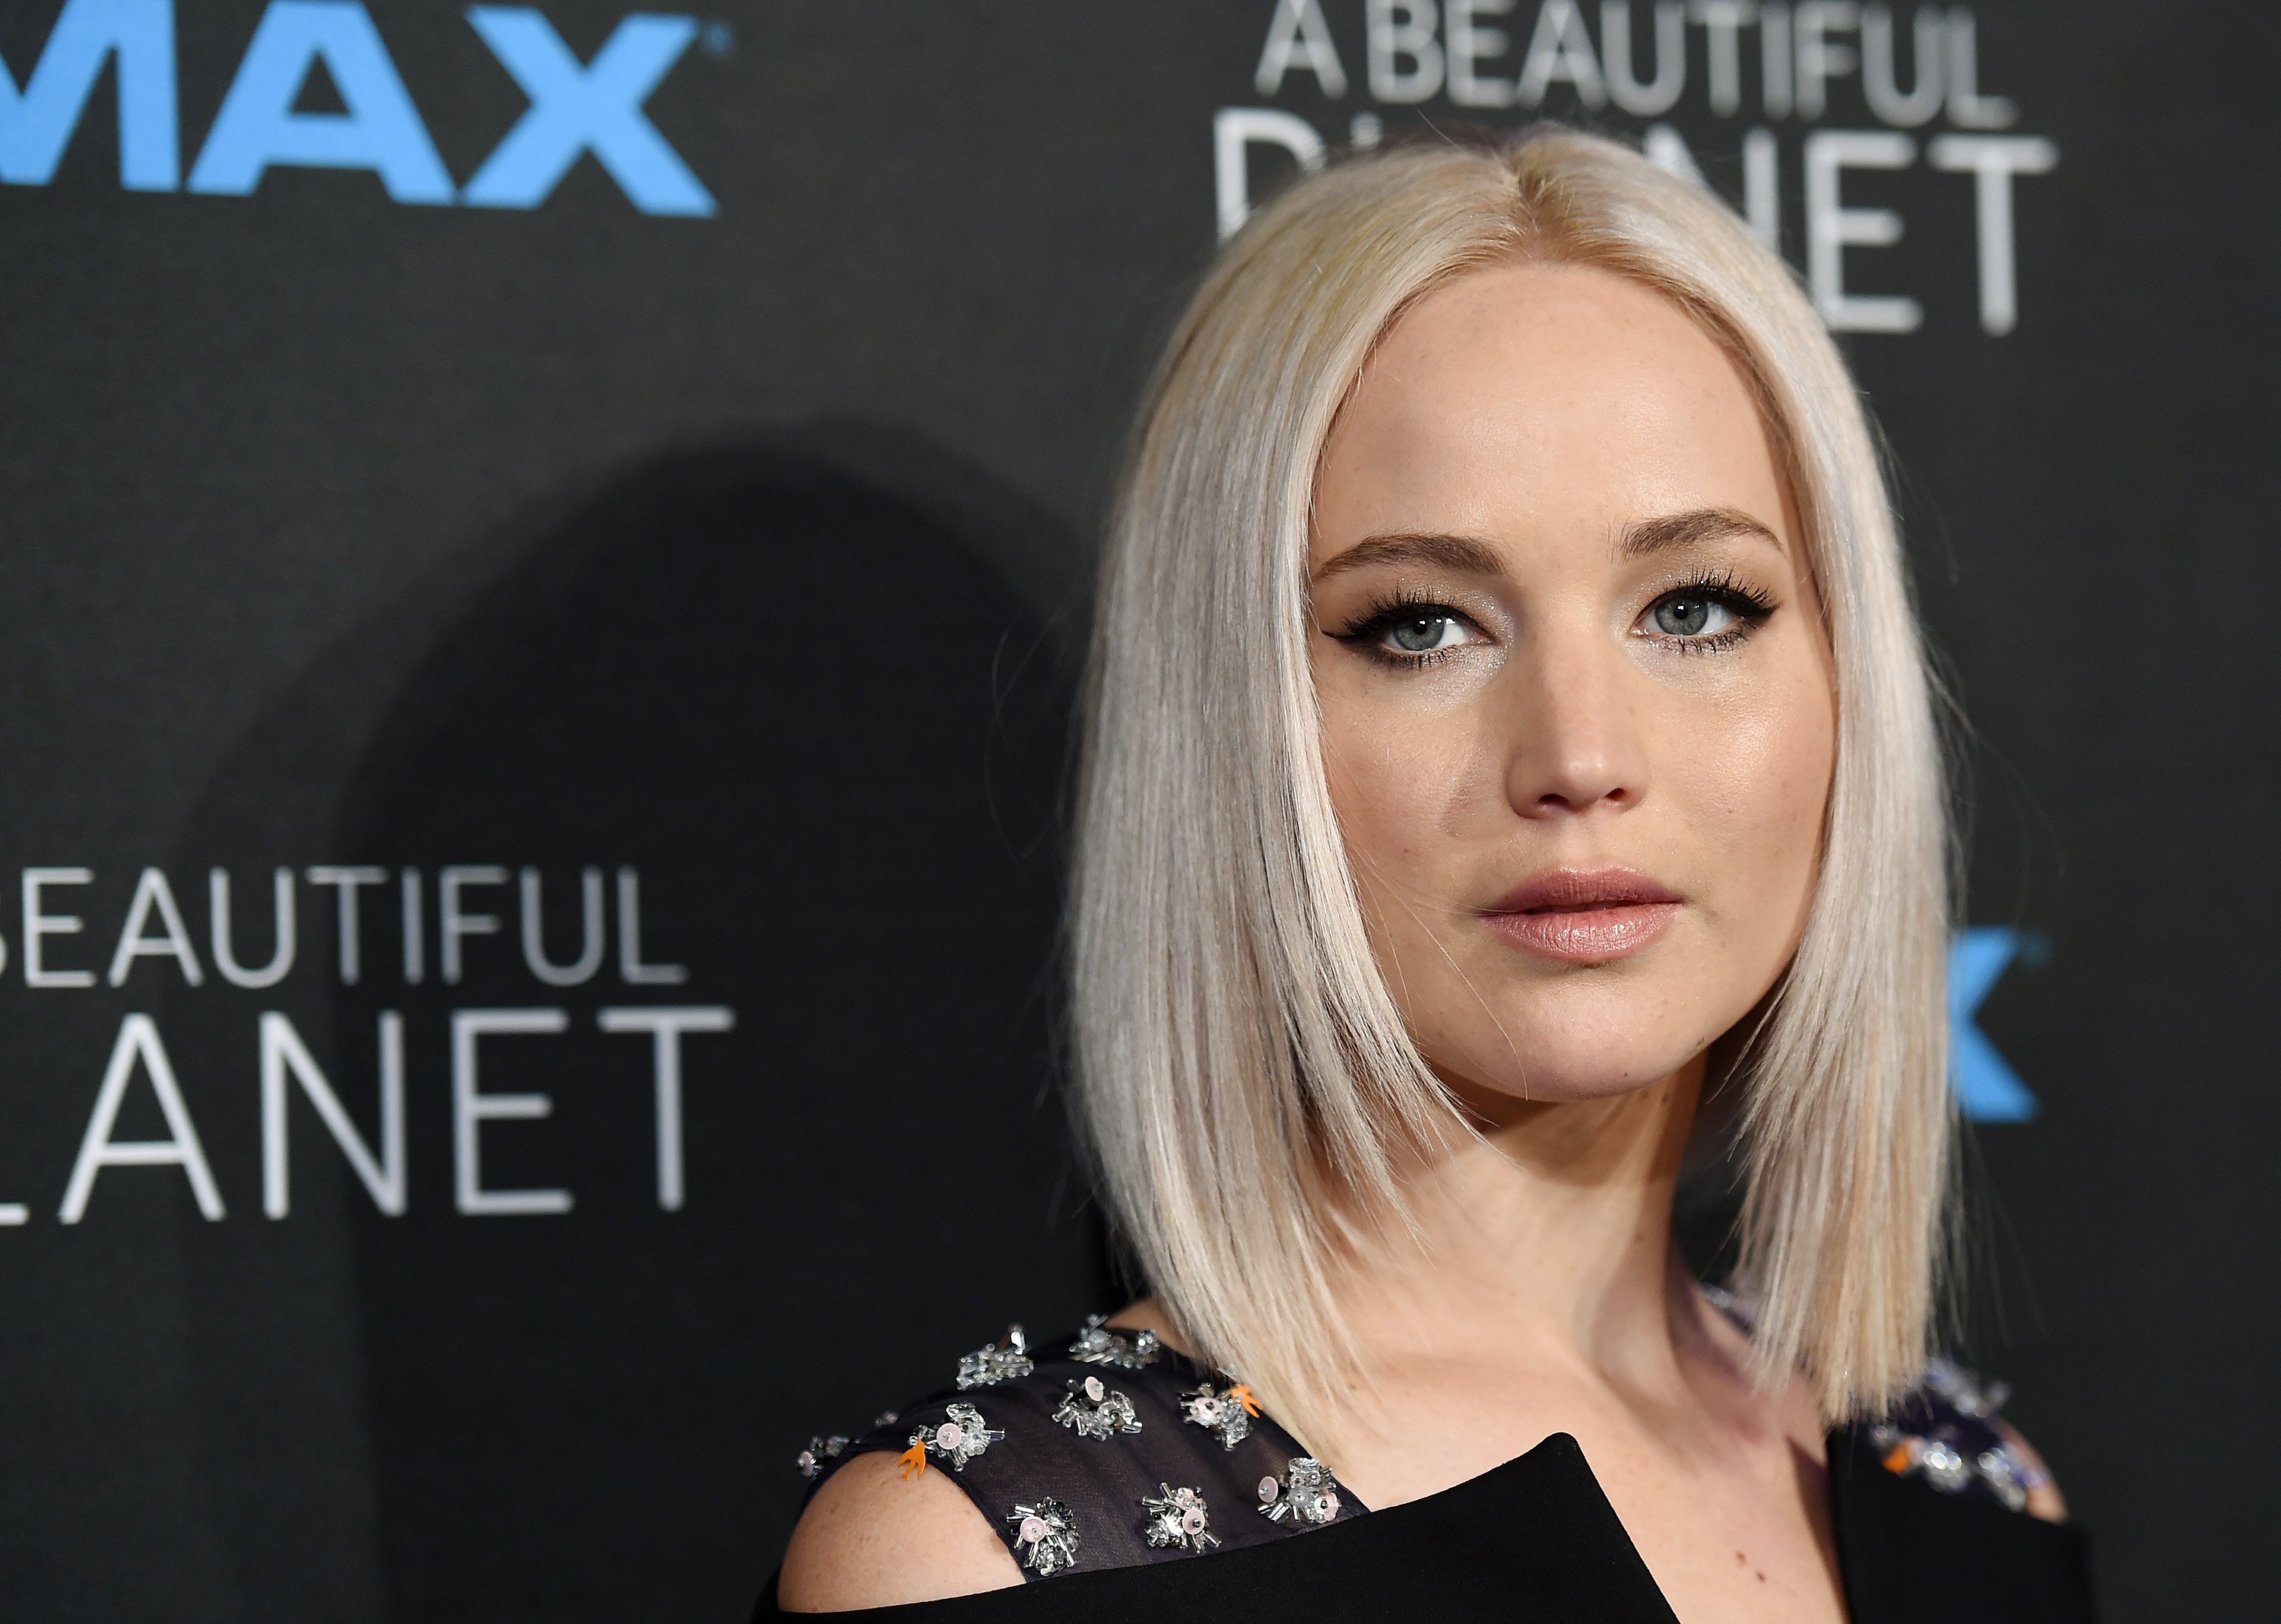 Jennifer Lawrence posing on the red carpet in a black floral dress as she stares straight ahead.